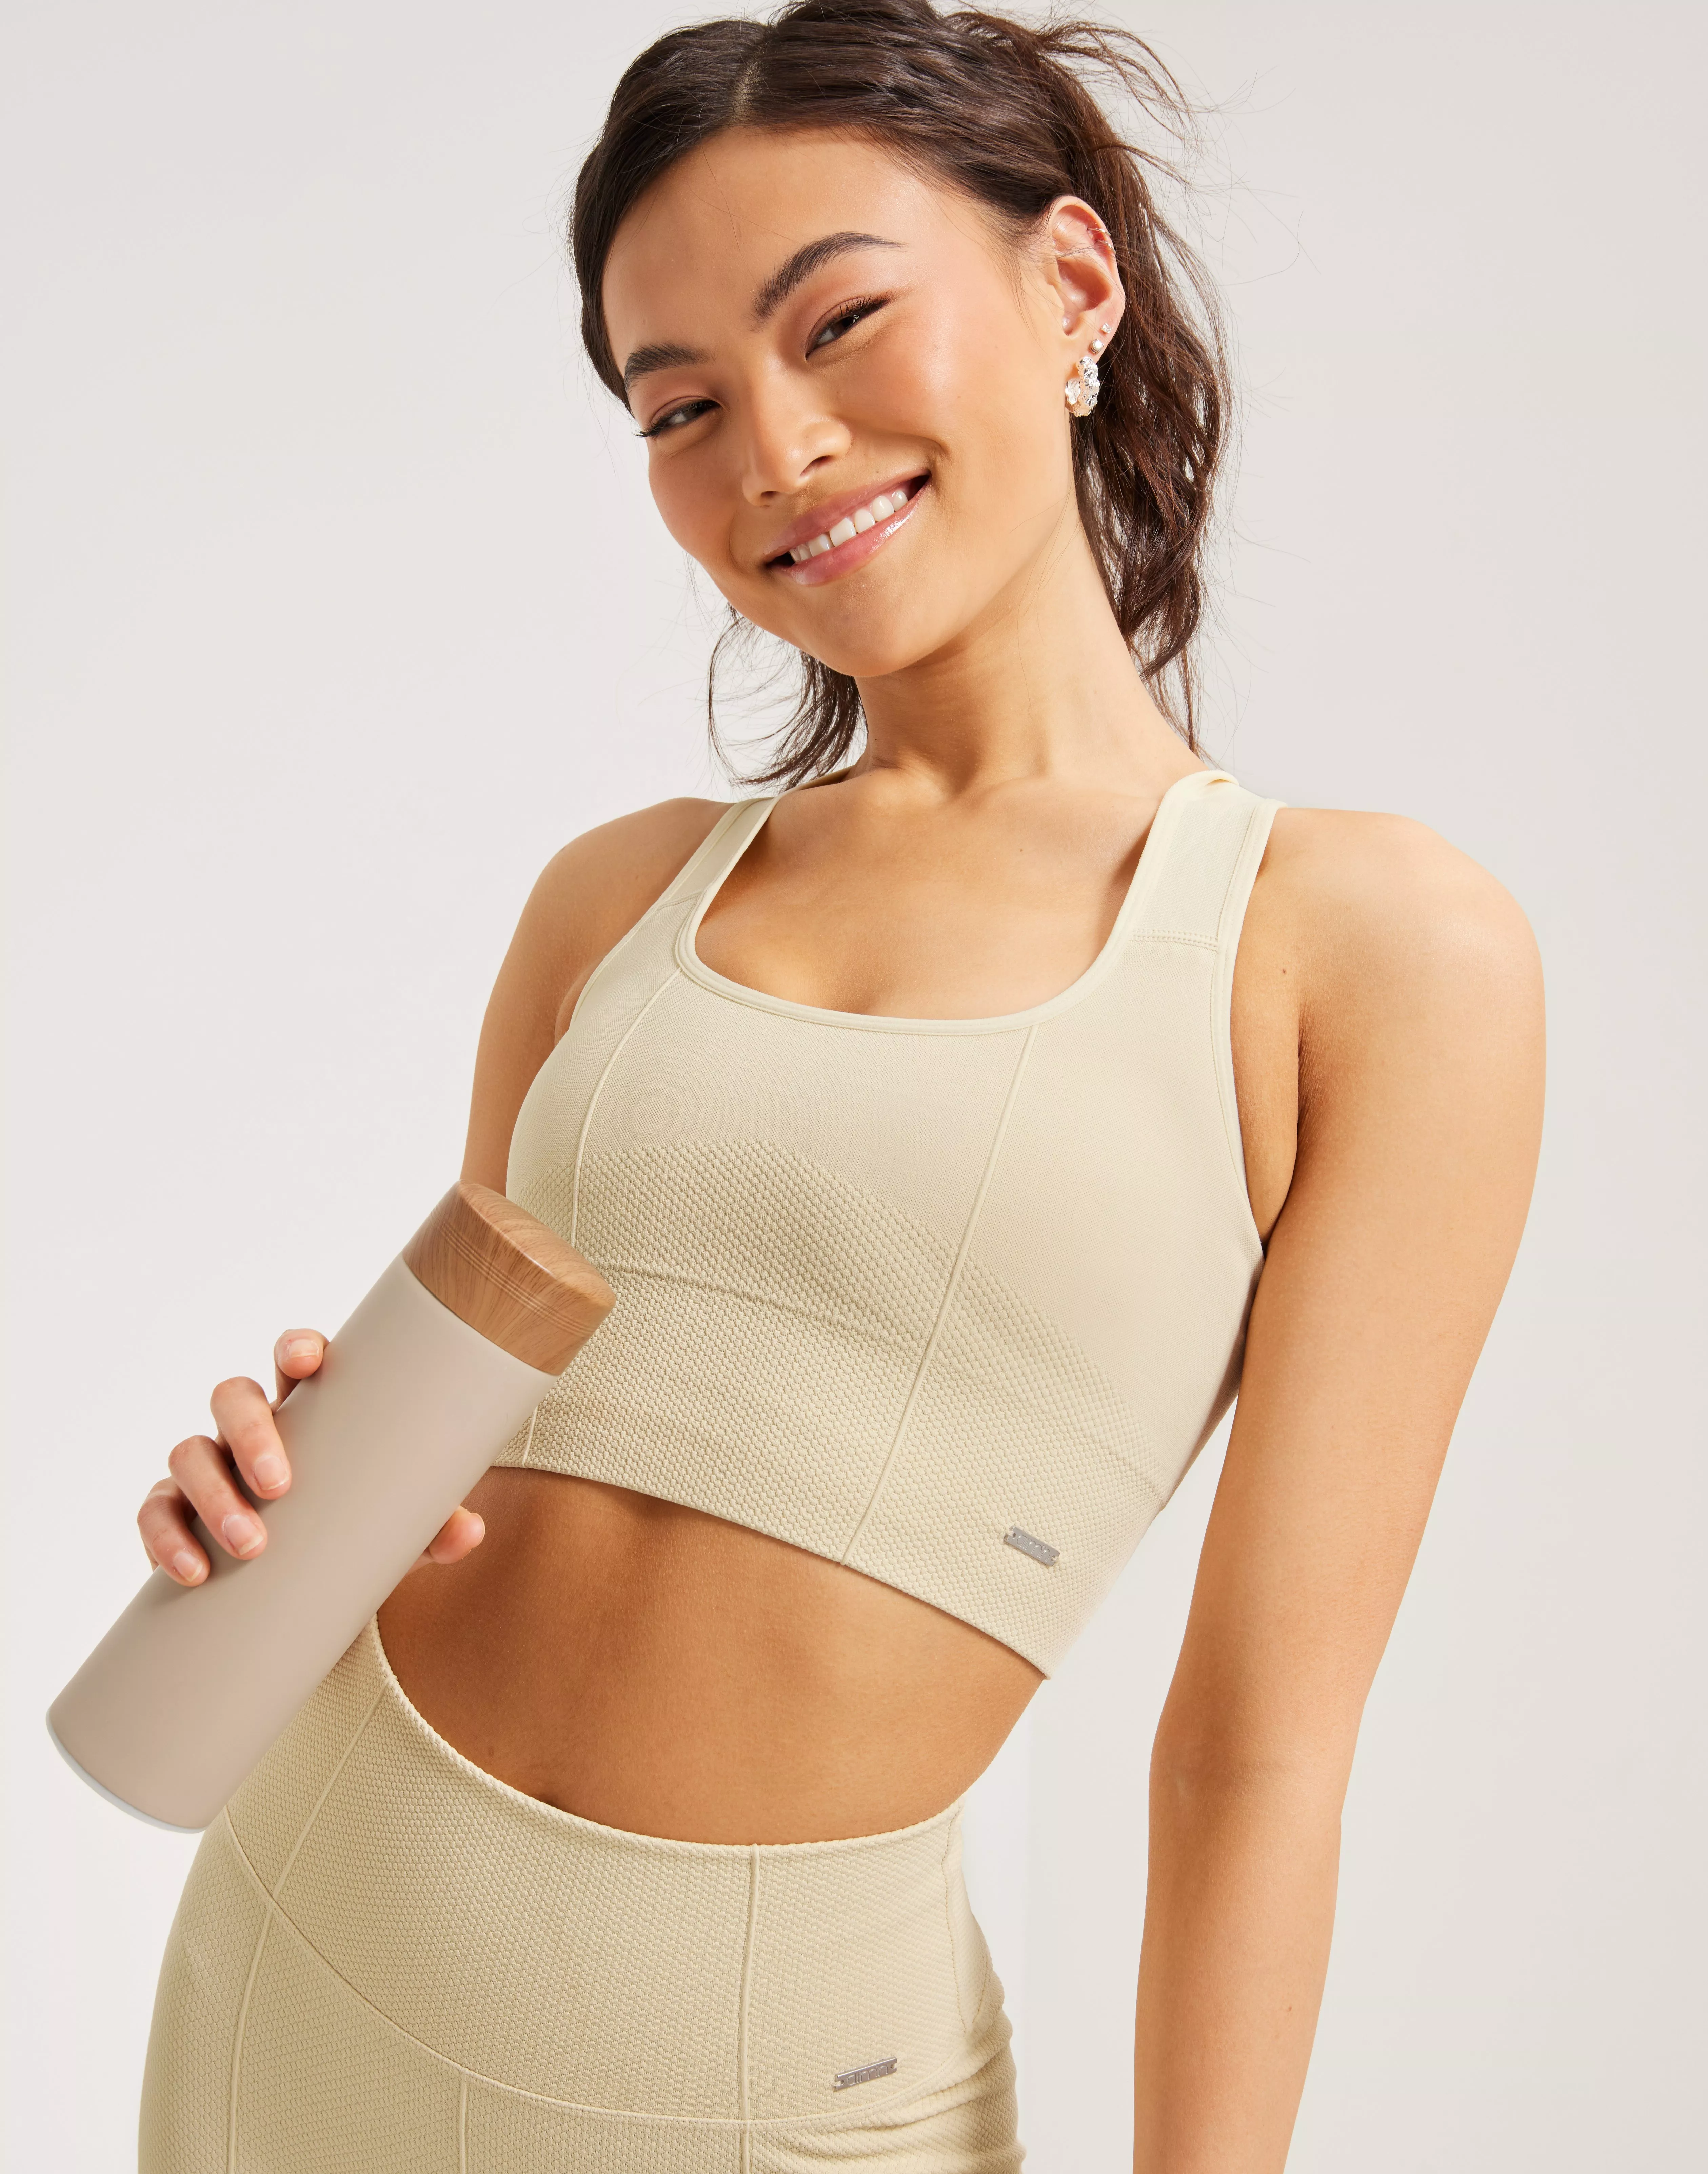 Buy Aim'n Luxe Seamless High Support Bra - White